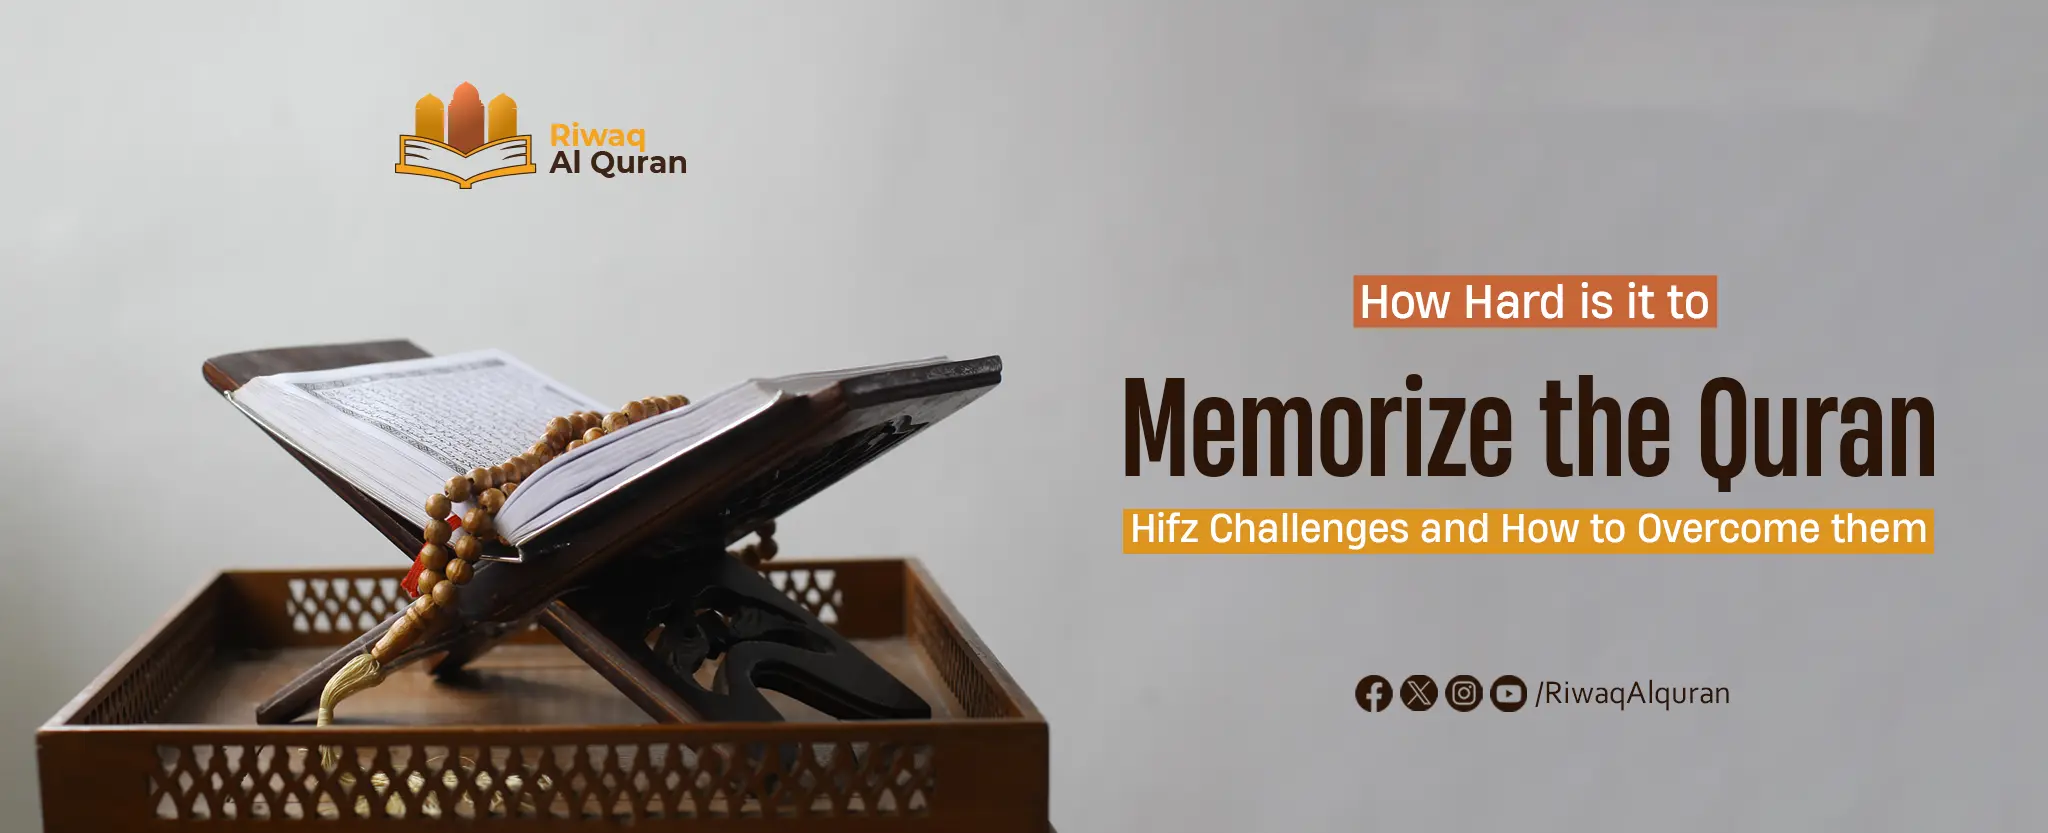 How Hard is it to Memorize the Quran? Hifz Challenges and How to Overcome Them